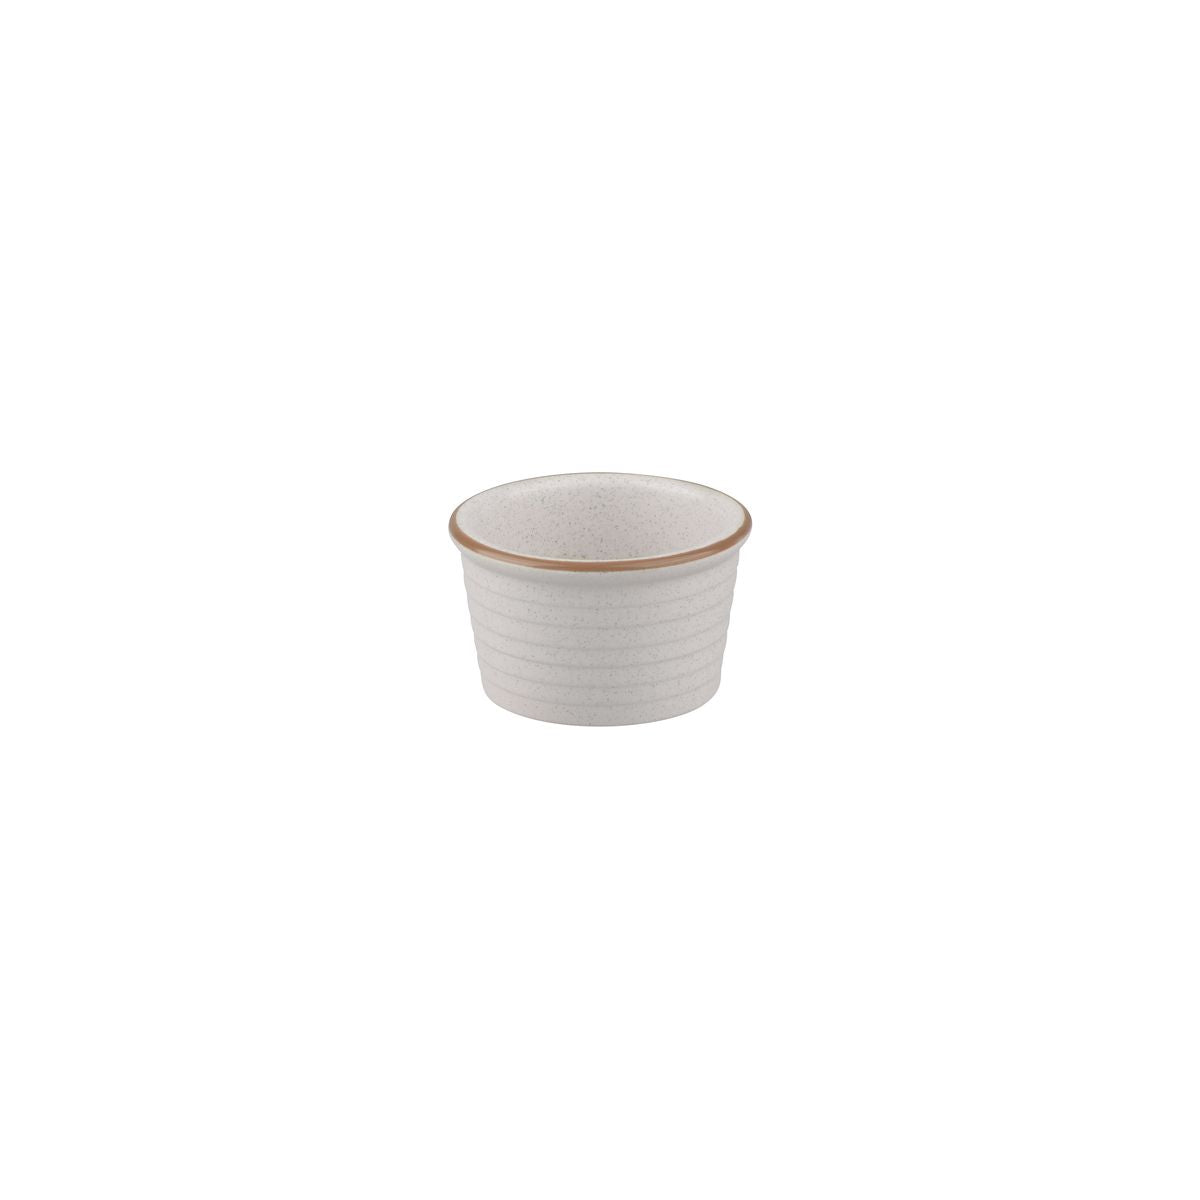 Ramekin - Ribbed, 140ml, Zuma Mineral from Zuma. ribbed, made out of Ceramic and sold in boxes of 6. Hospitality quality at wholesale price with The Flying Fork! 